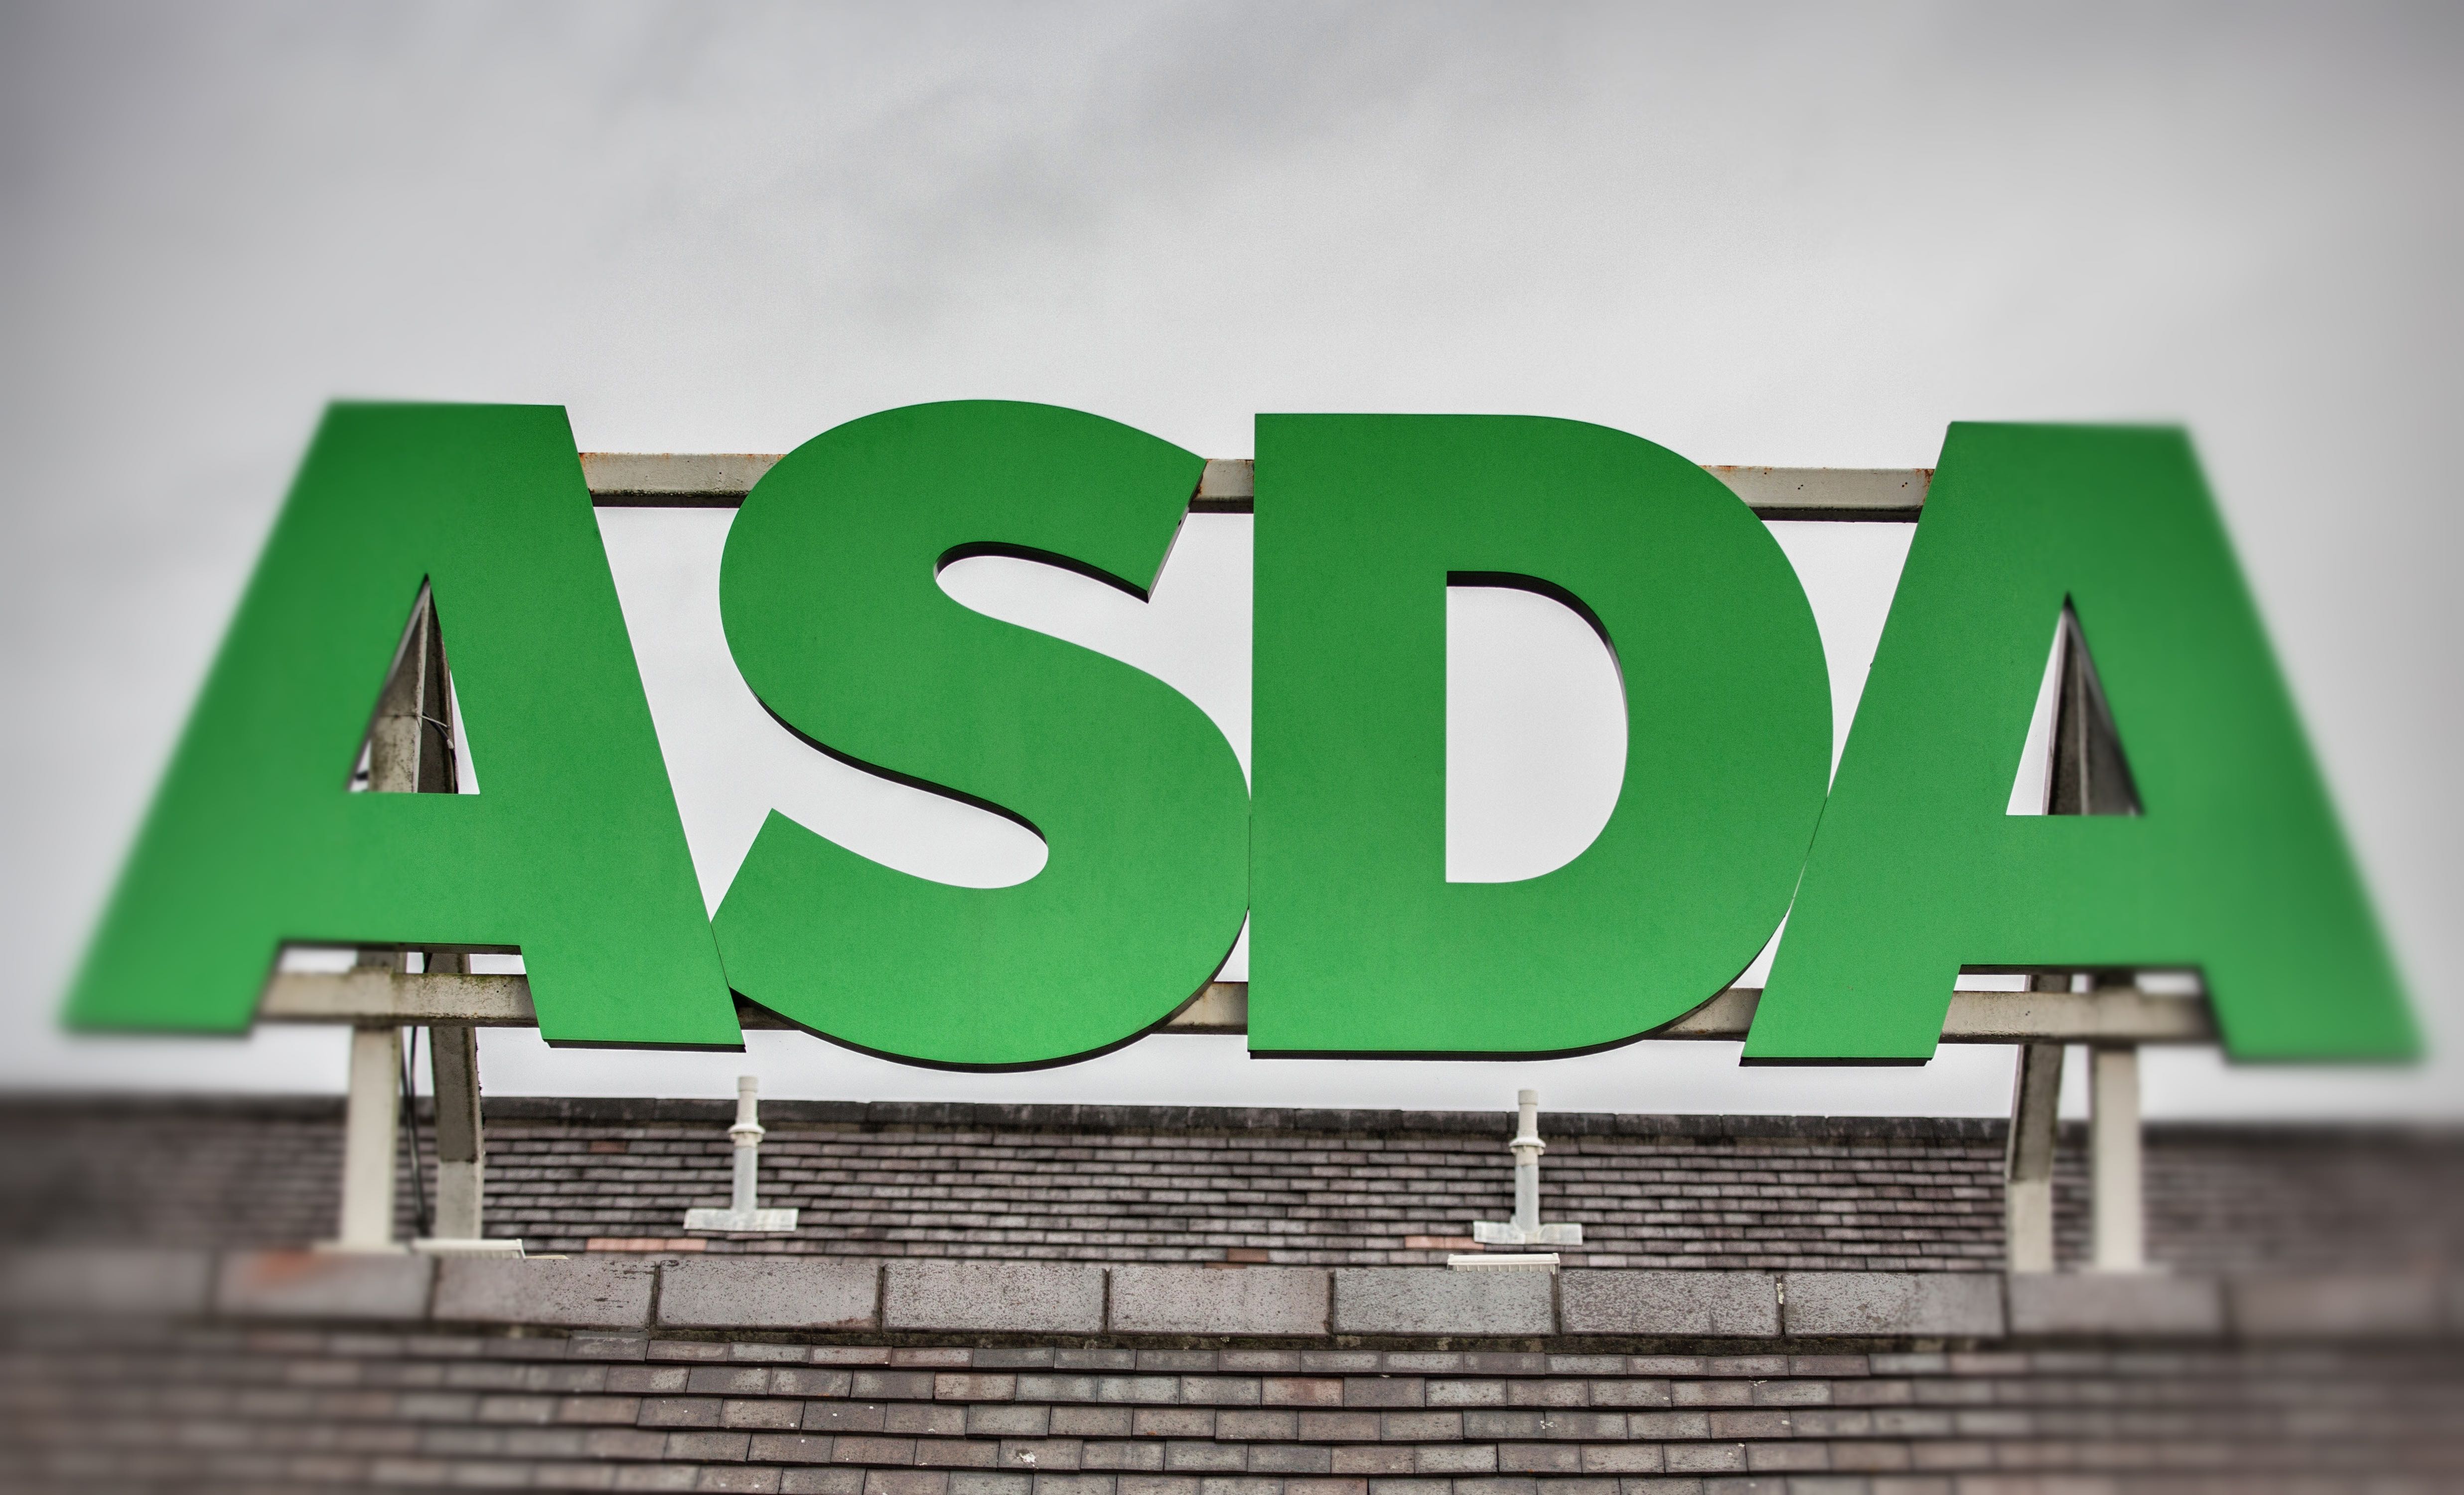 BRISTOL, ENGLAND - NOVEMBER 18: (EDITORS NOTE: This image was created using digital filters) The Asda sign is displayed outside a branch of the supermarket on November 18, 2015 in Bristol, England. As the crucial Christmas retail period approaches, all the major supermarkets are becoming increasingly competitive to retain and increase their share of the market. (Photo by Matt Cardy/Getty Images)